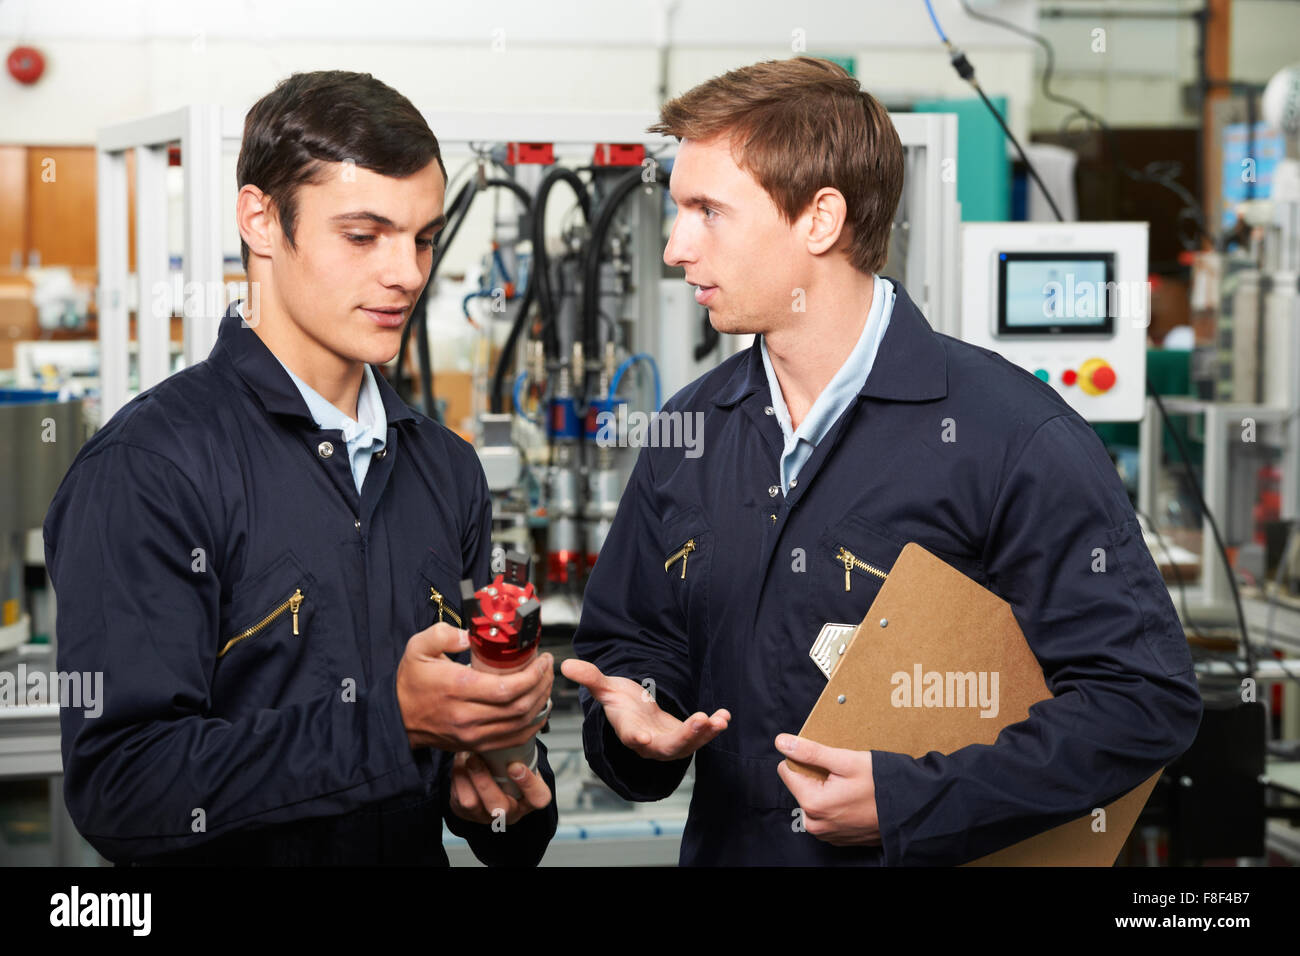 Engineer And Trainee Discussing Component In Factory Stock Photo